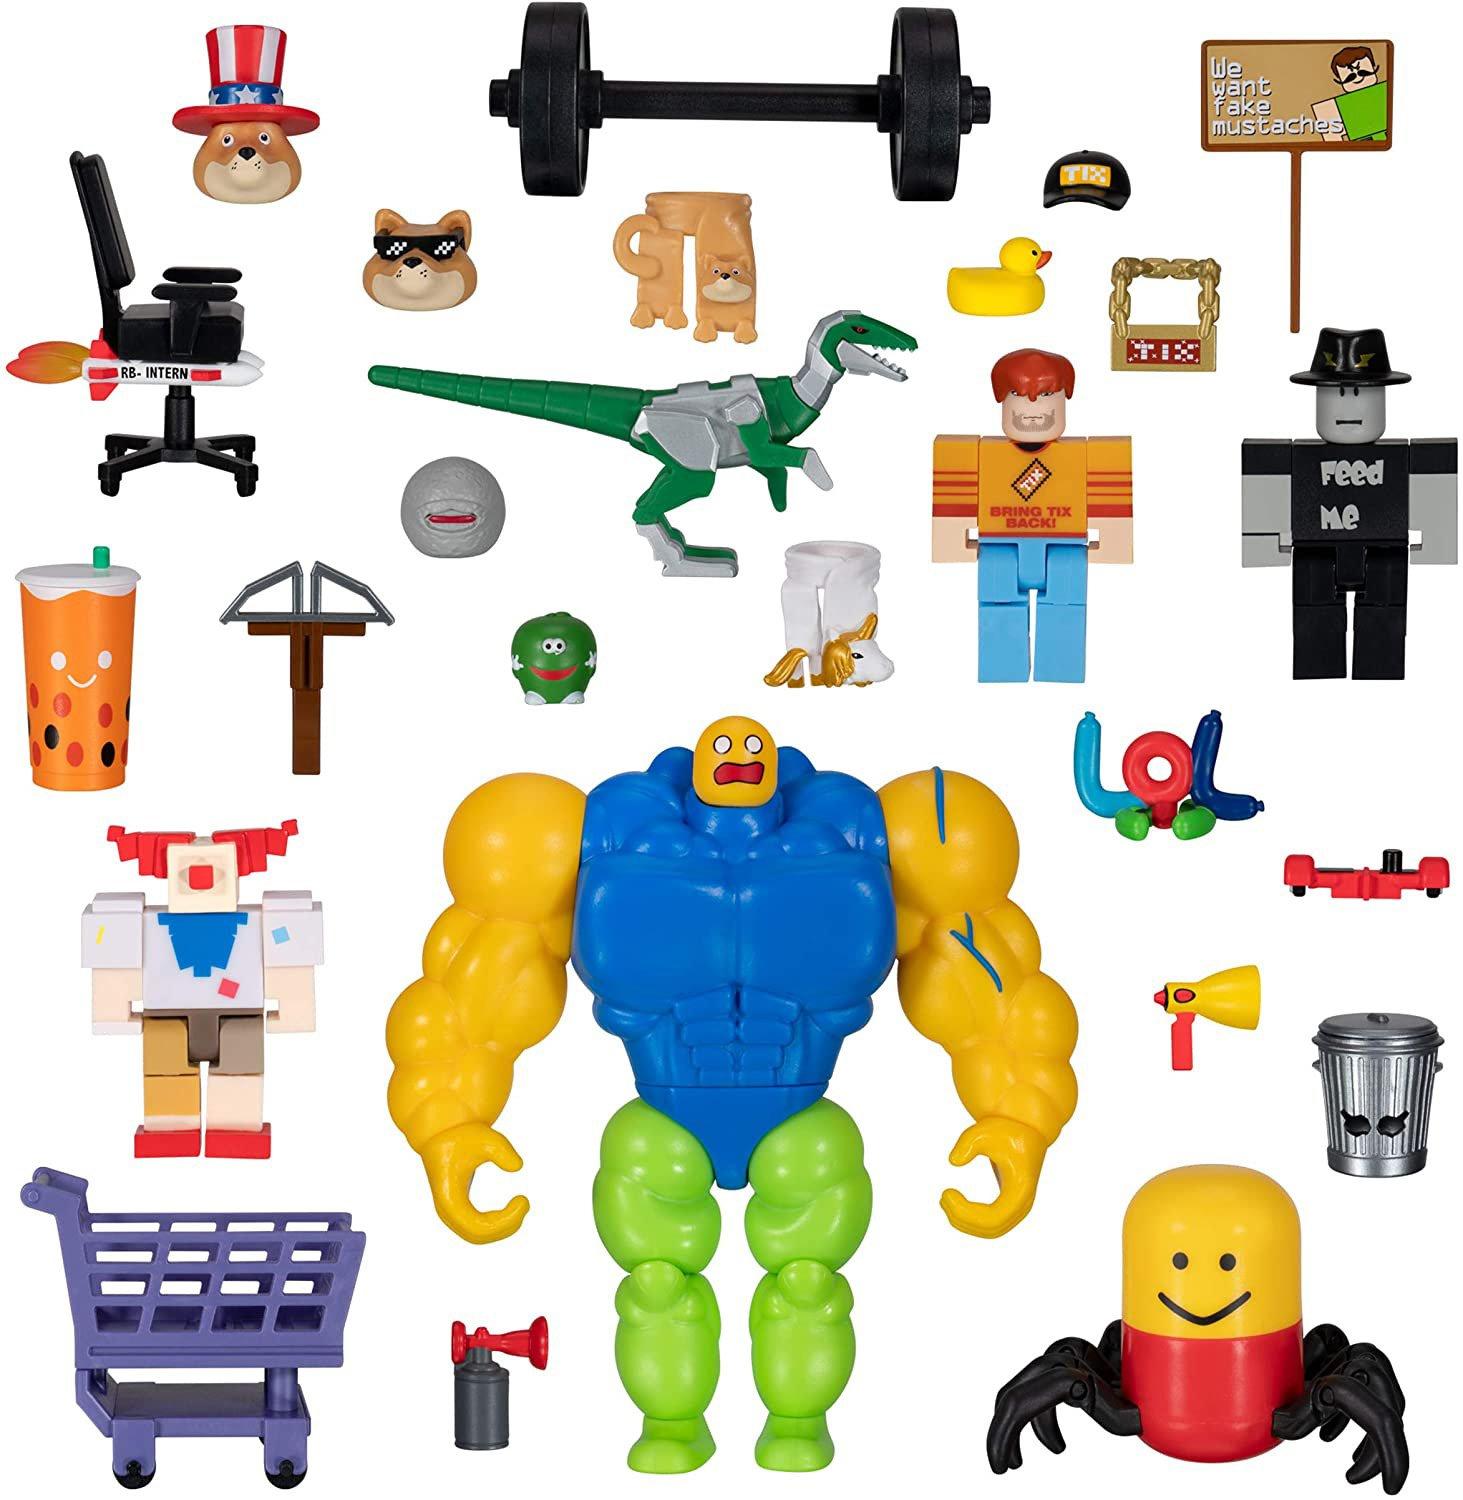 Roblox Action Collection Meme Pack Playset Includes Exclusive Virtual Item Gamestop - roblox blox adventures all collectibles